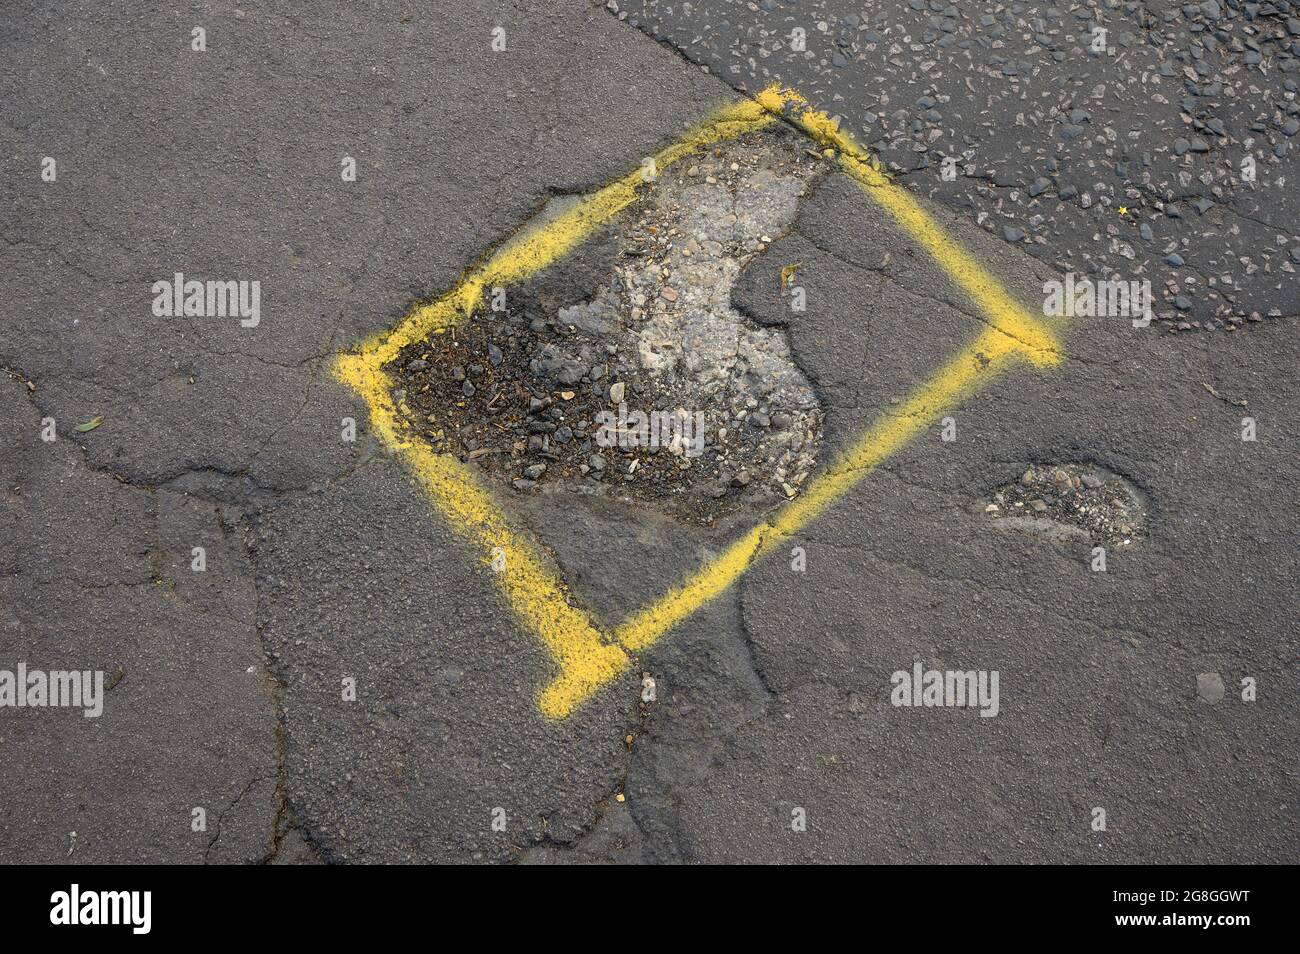 A pothole in the road, with marking in preparation for repair. Stock Photo